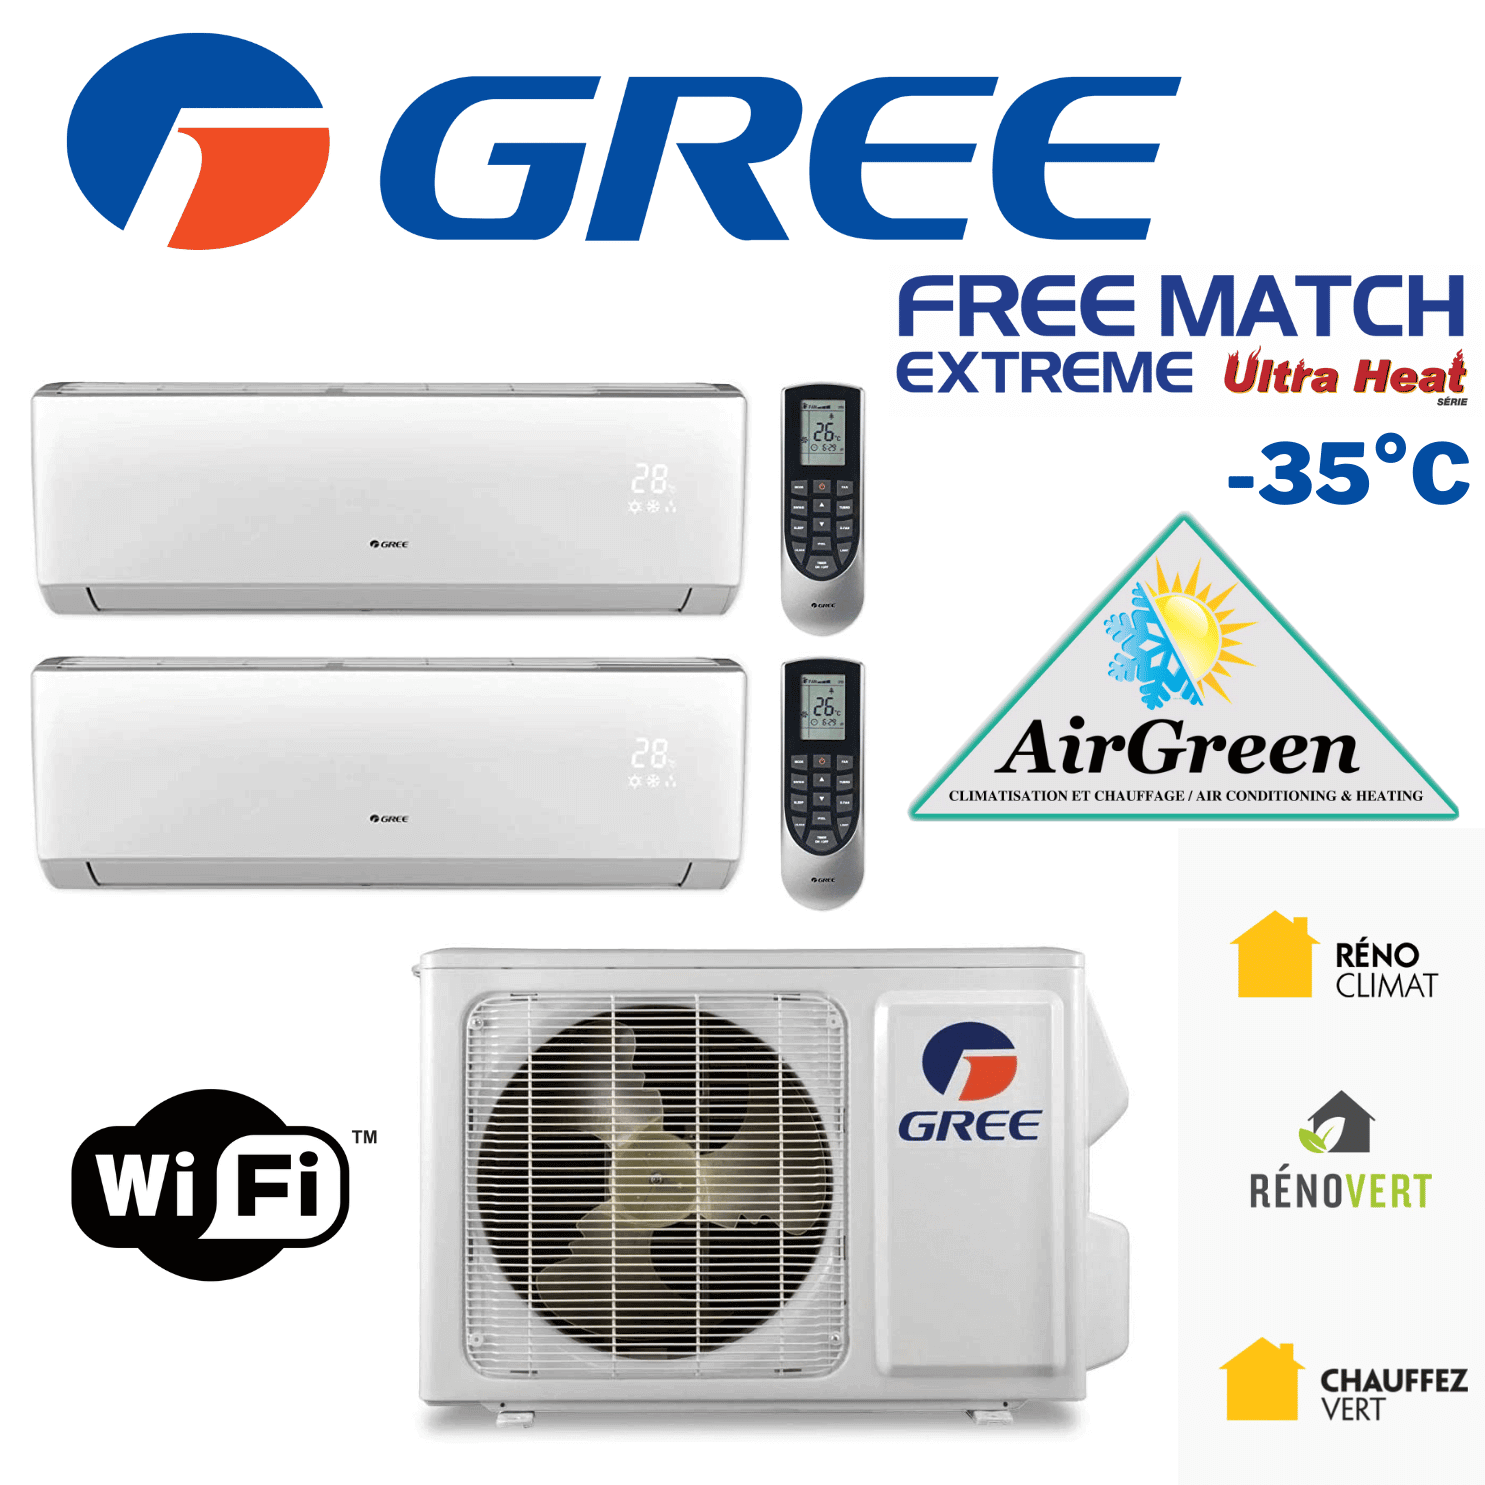 Thermopompe Double Zone Gree Free Match Extreme Compresseur 42 000 BTU